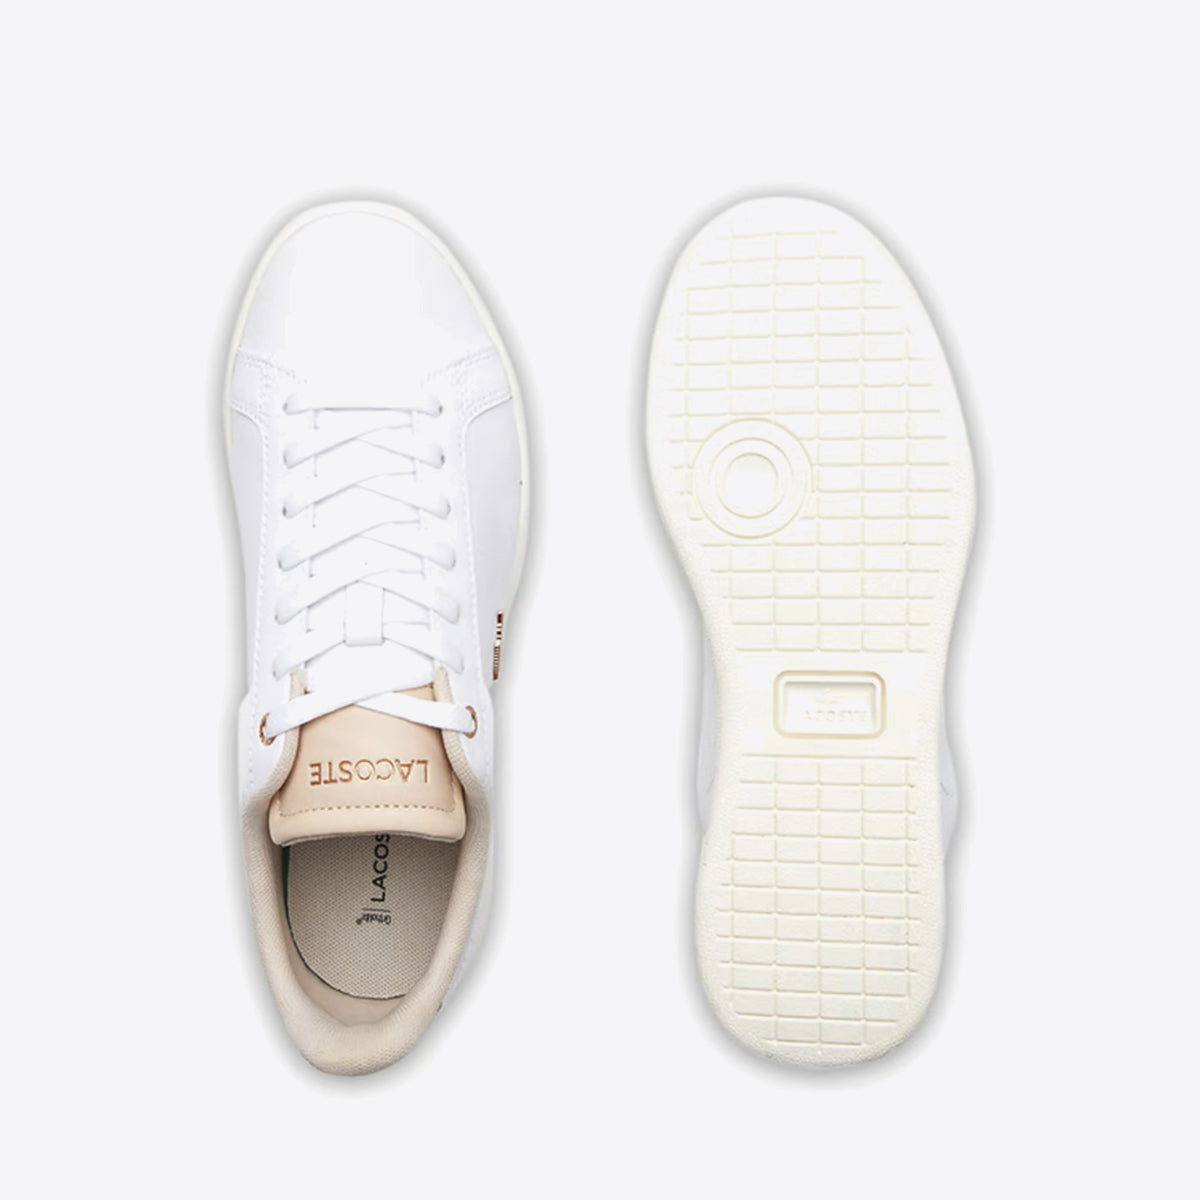  Carnaby Pro - Women's White/Off White